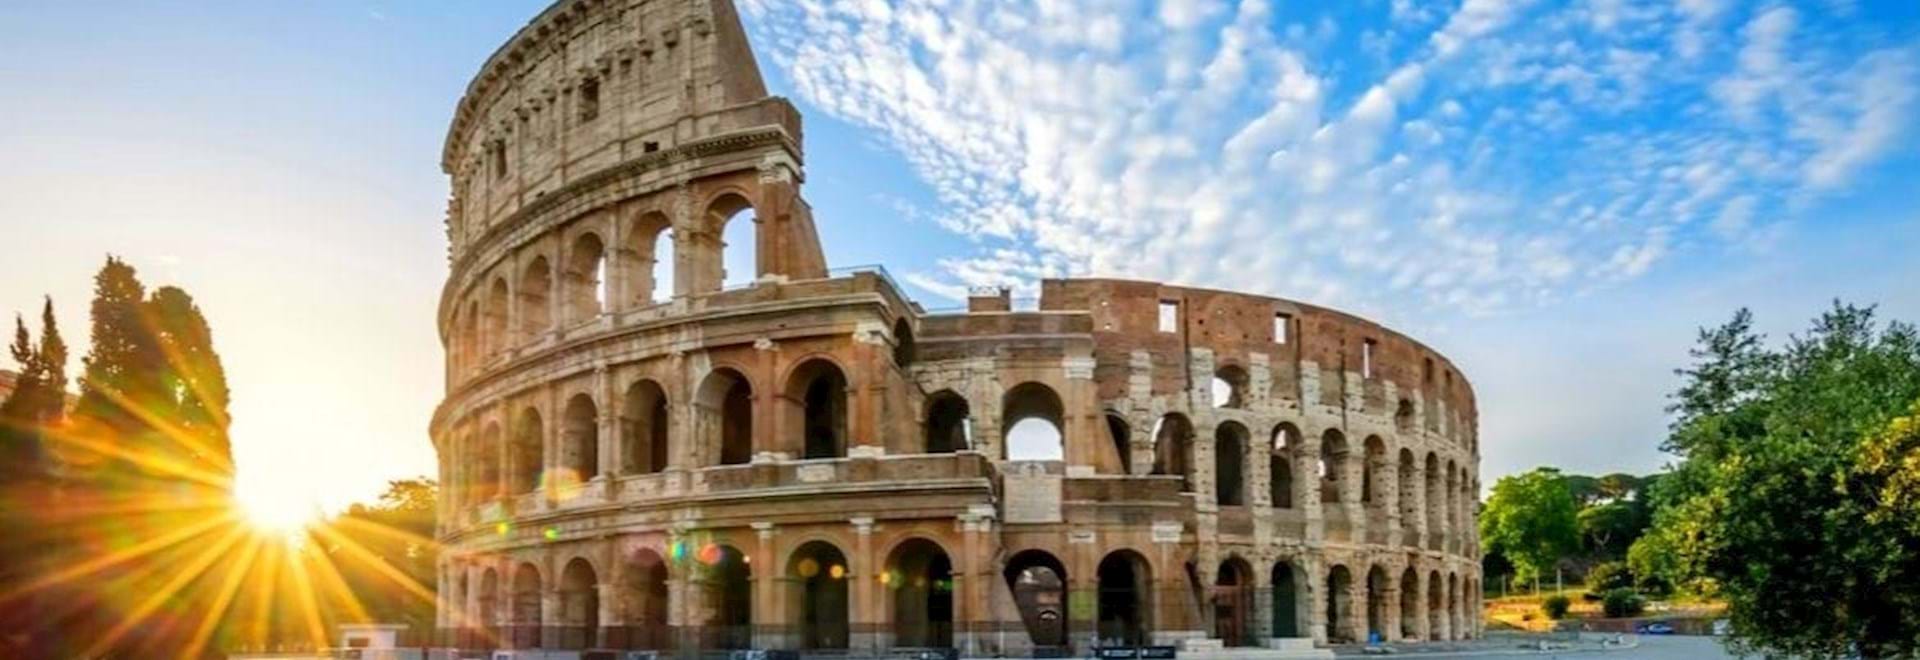 Finding the Right Colosseum Tour for You - Dark Rome